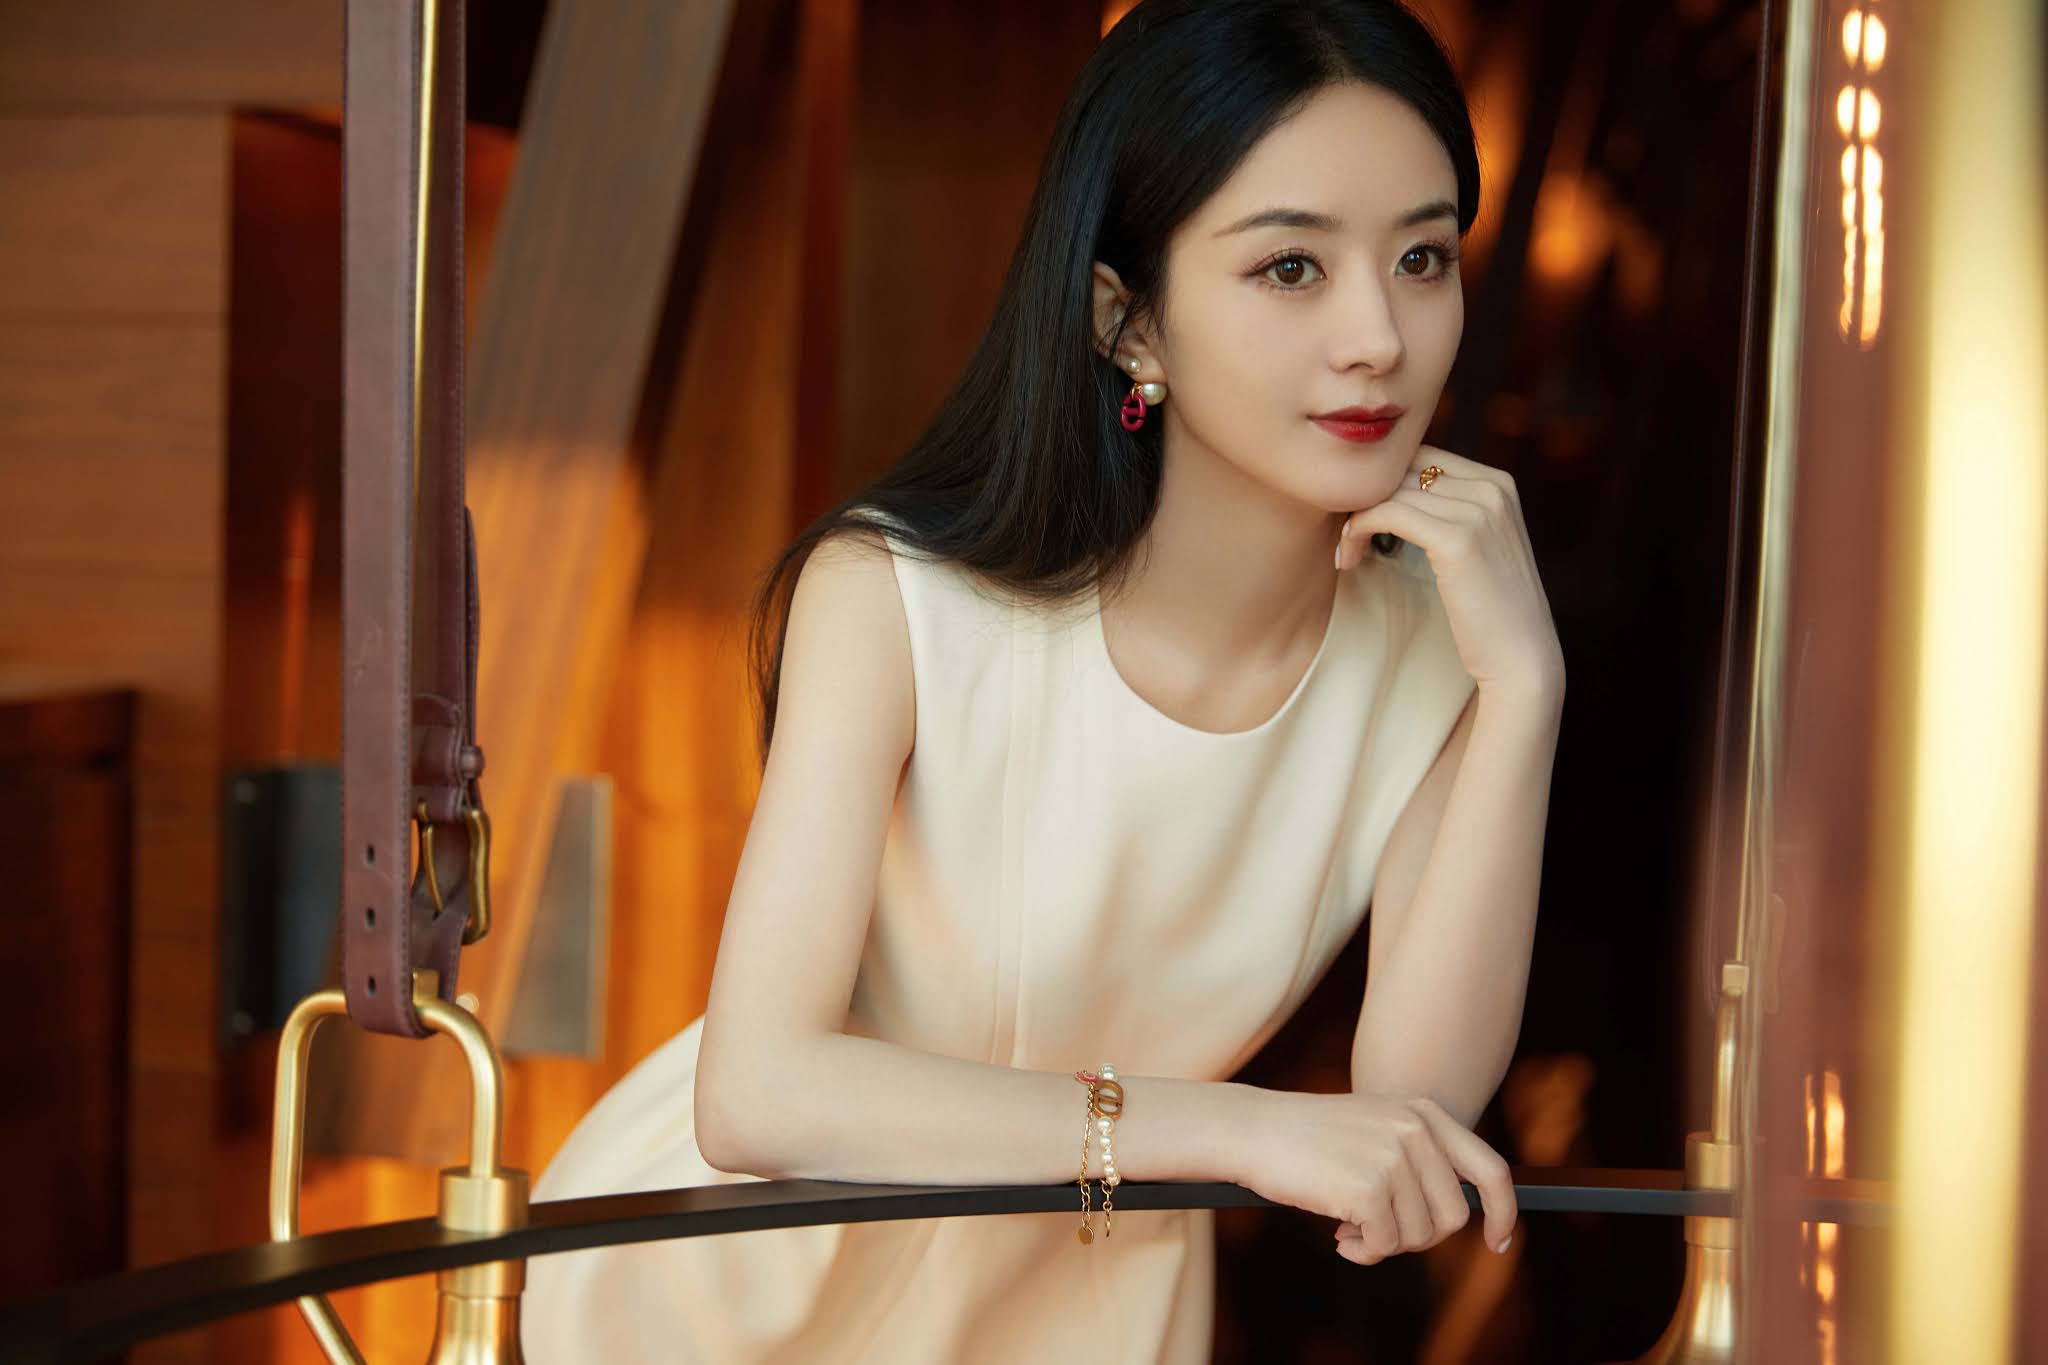 Zhao Liying at brand event.